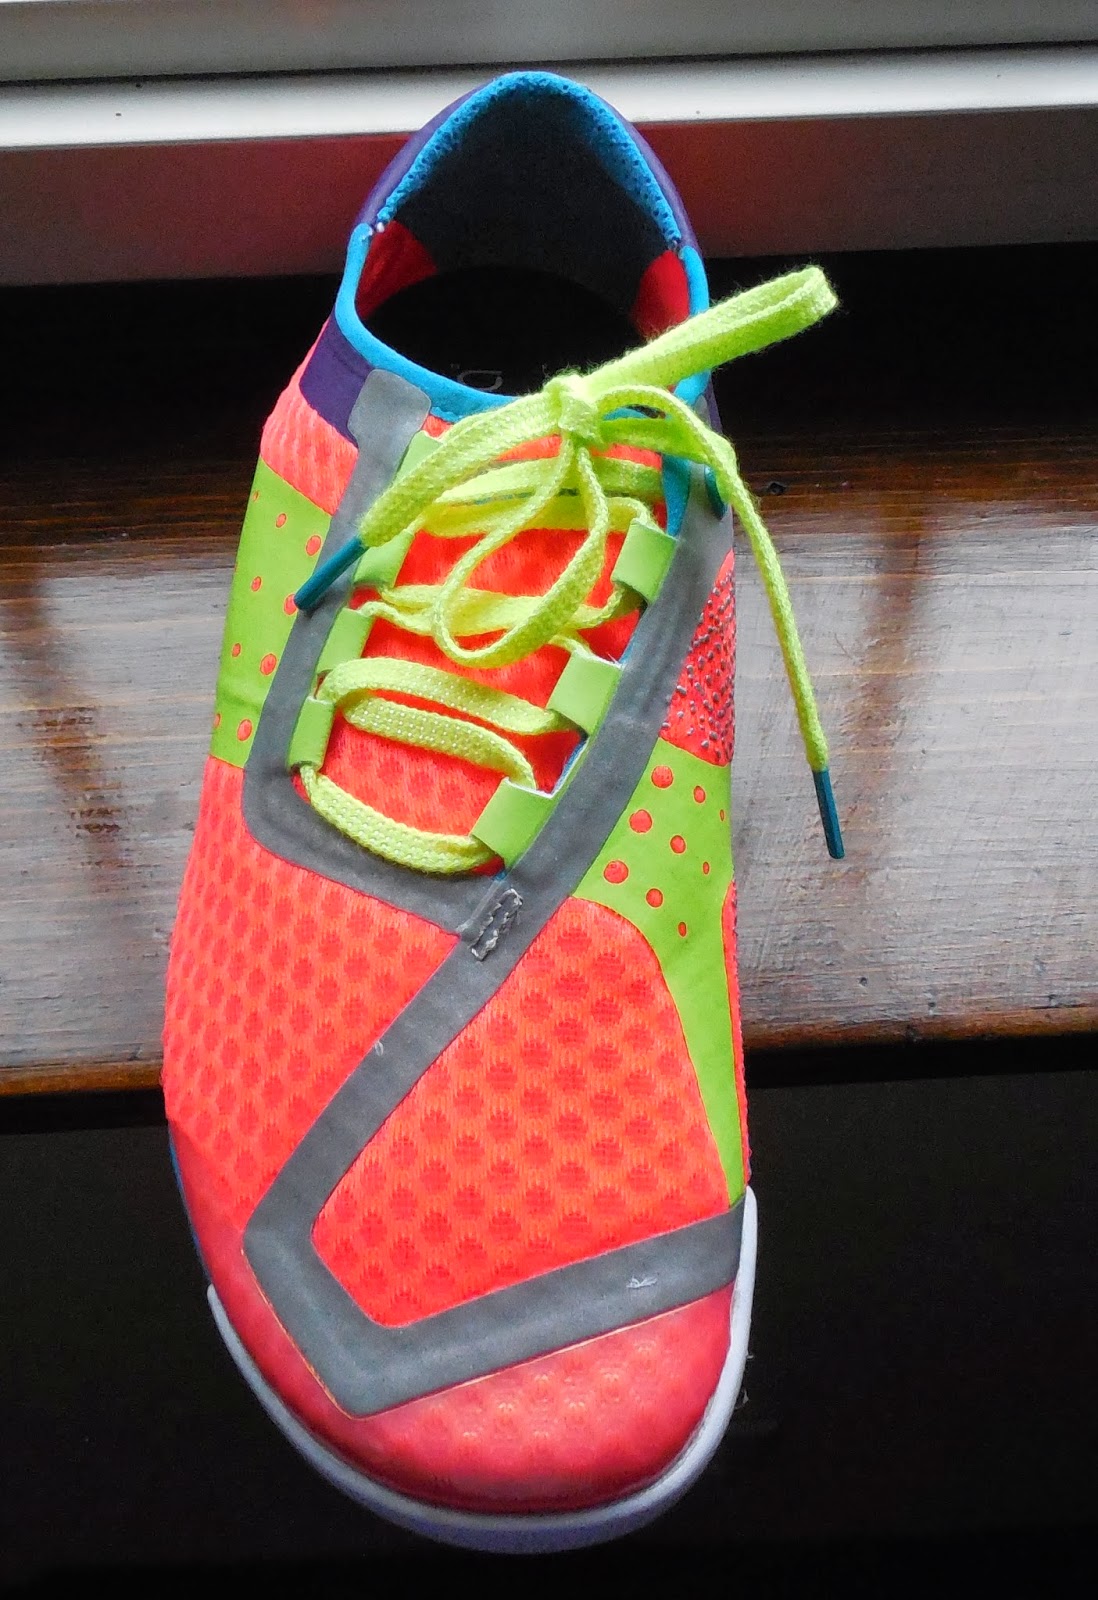 Skora Running Shoes Review and Giveaway | The Nutritionist Reviews